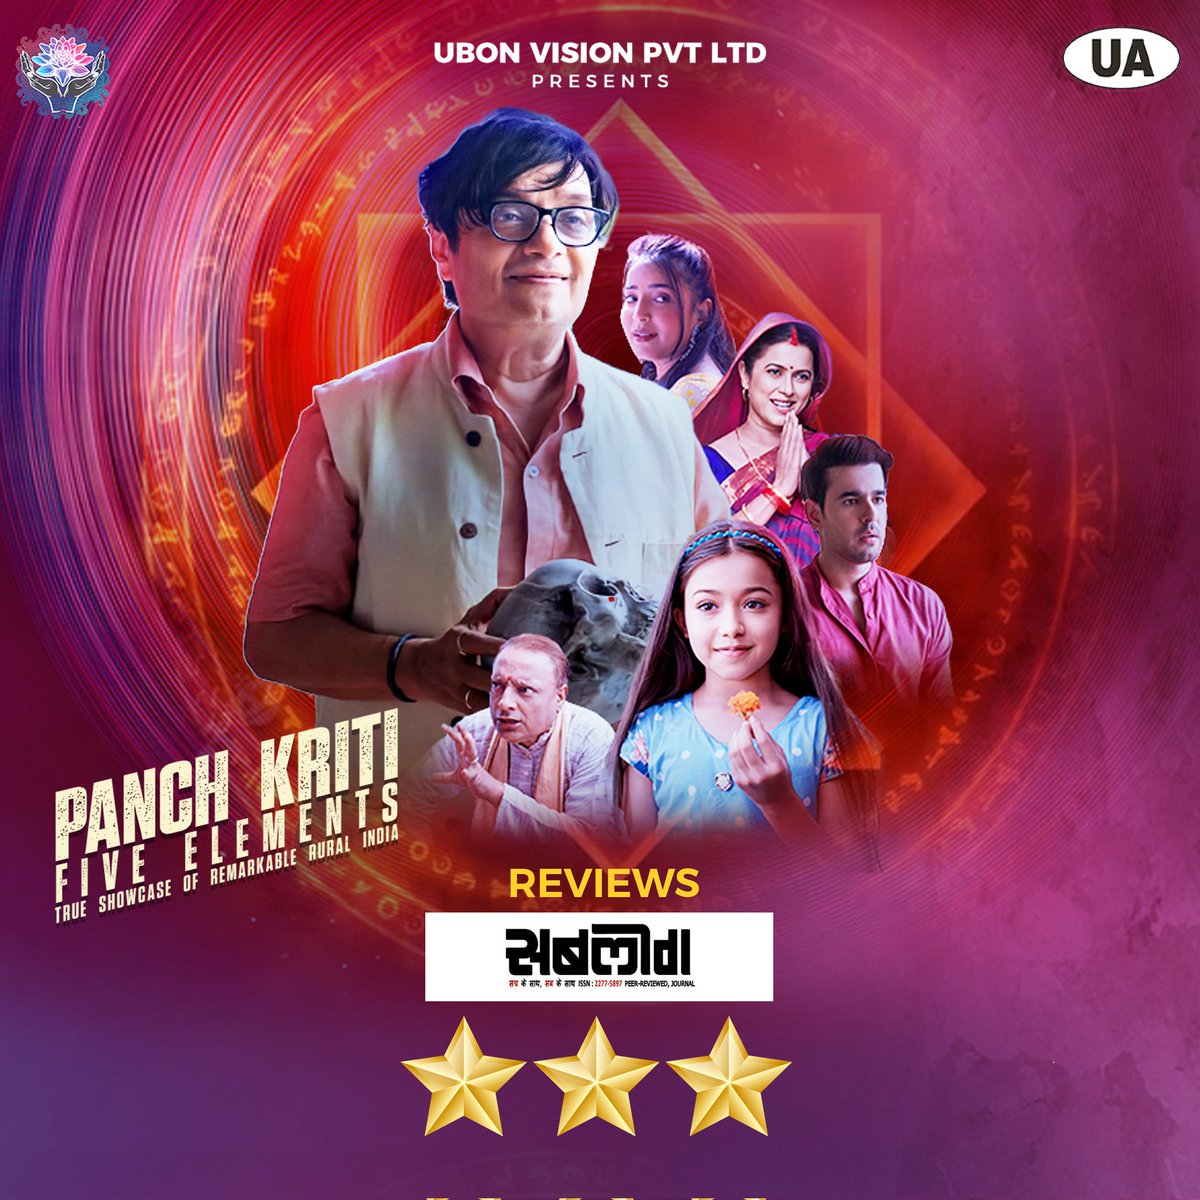 Have You Watched 'Panch Kriti' Film? If not, Then Book your tickets now😌❤️ Win Exciting Gifts In Cinema Book Your Tickets Now linktr.ee/PanchKritiTick… 𝗧&𝗖: 𝗯𝗶𝘁.𝗹𝘆/𝗣𝗮𝗻𝗰𝗵𝗞𝗿𝗶𝘁𝗶_𝗧𝗻𝗖 #panchkriti #thankyou #filmreview #trending #bookyourticketsnow #moviereleased